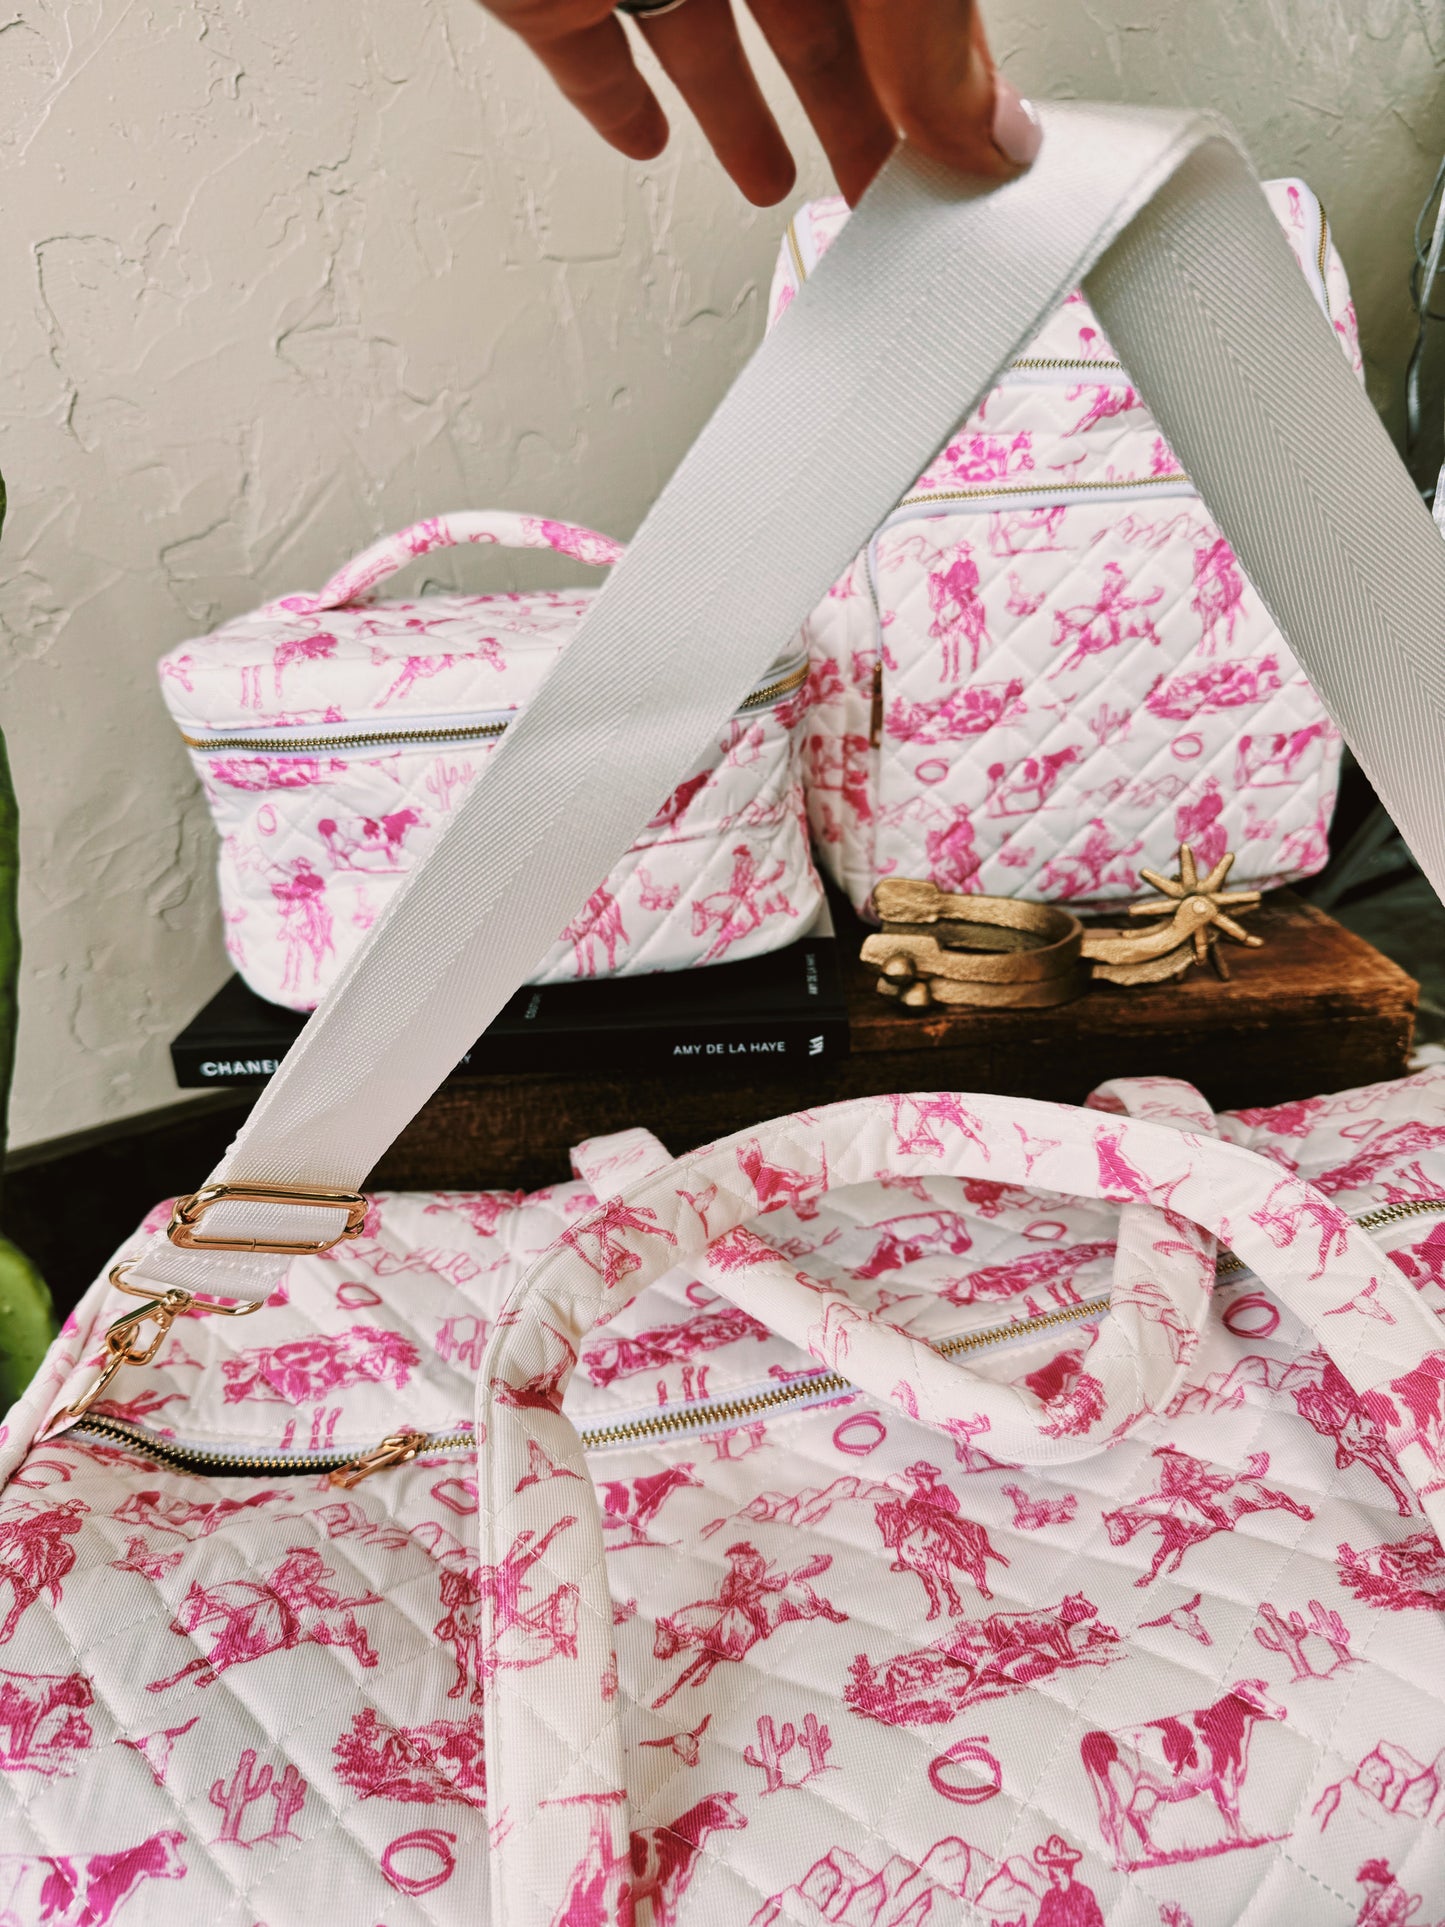 The Preppy Cowgirl Duffle Bag